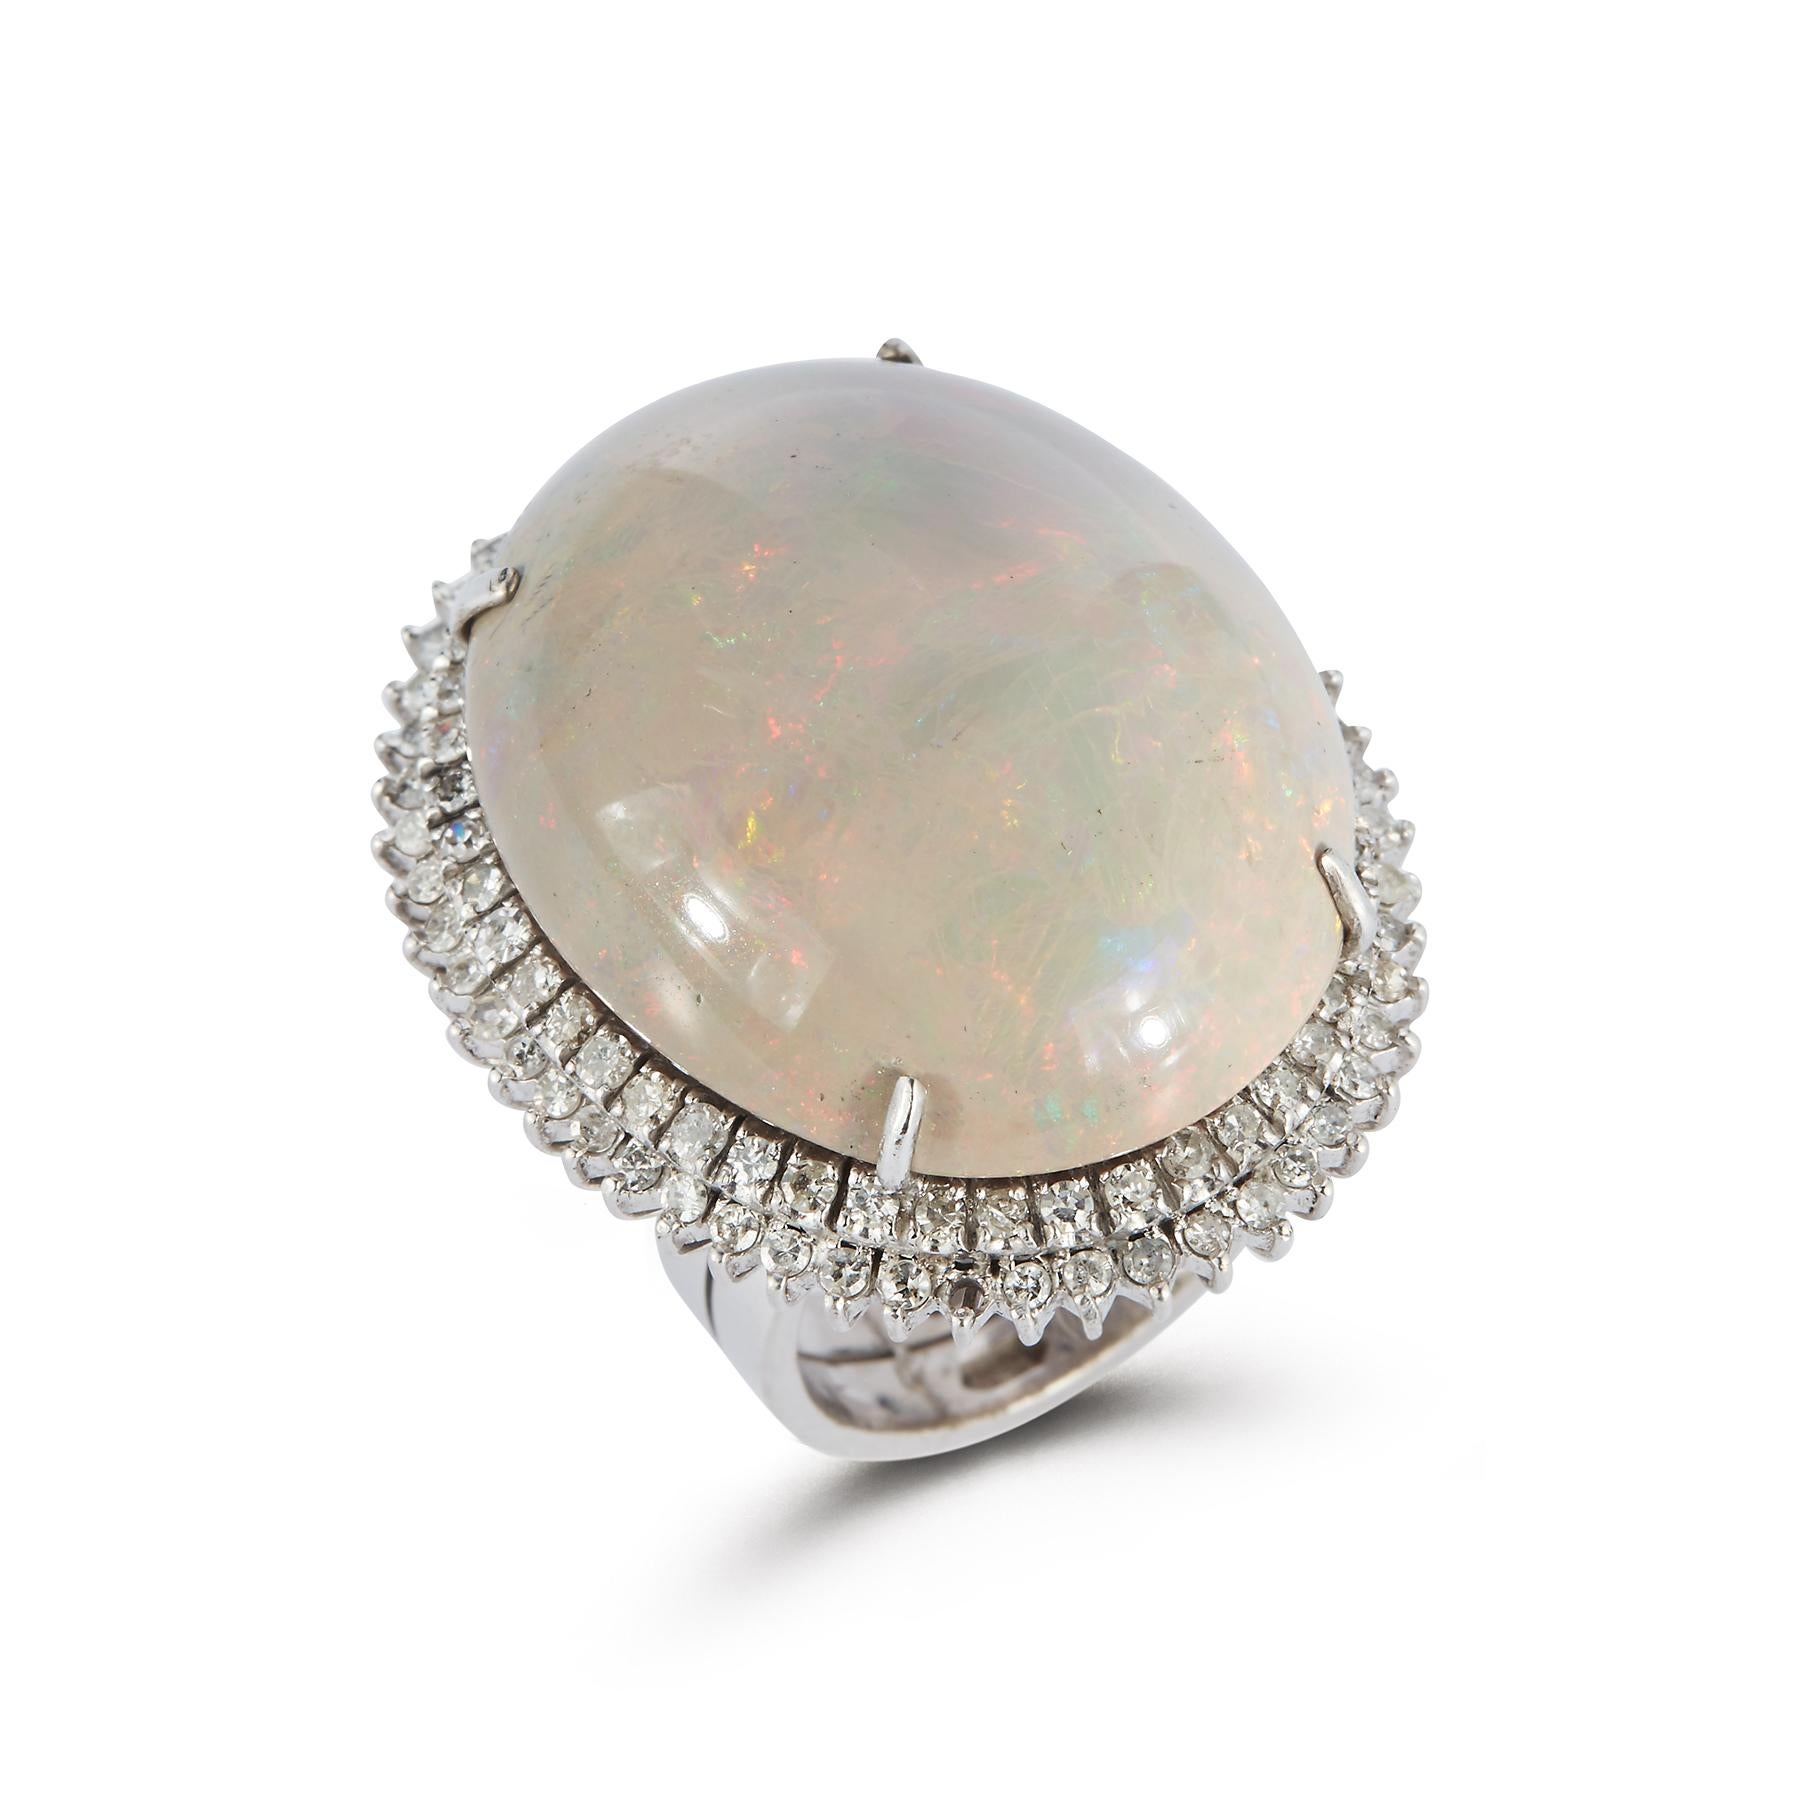 Opal & Diamond Cocktail Ring

Large Cabochon Opal Gem Surrounded by a 2 Row Round Cut Halo Diamonds

Ring Size: 6.25

Resizable Free of Charge

Gold Type: 14K White Gold